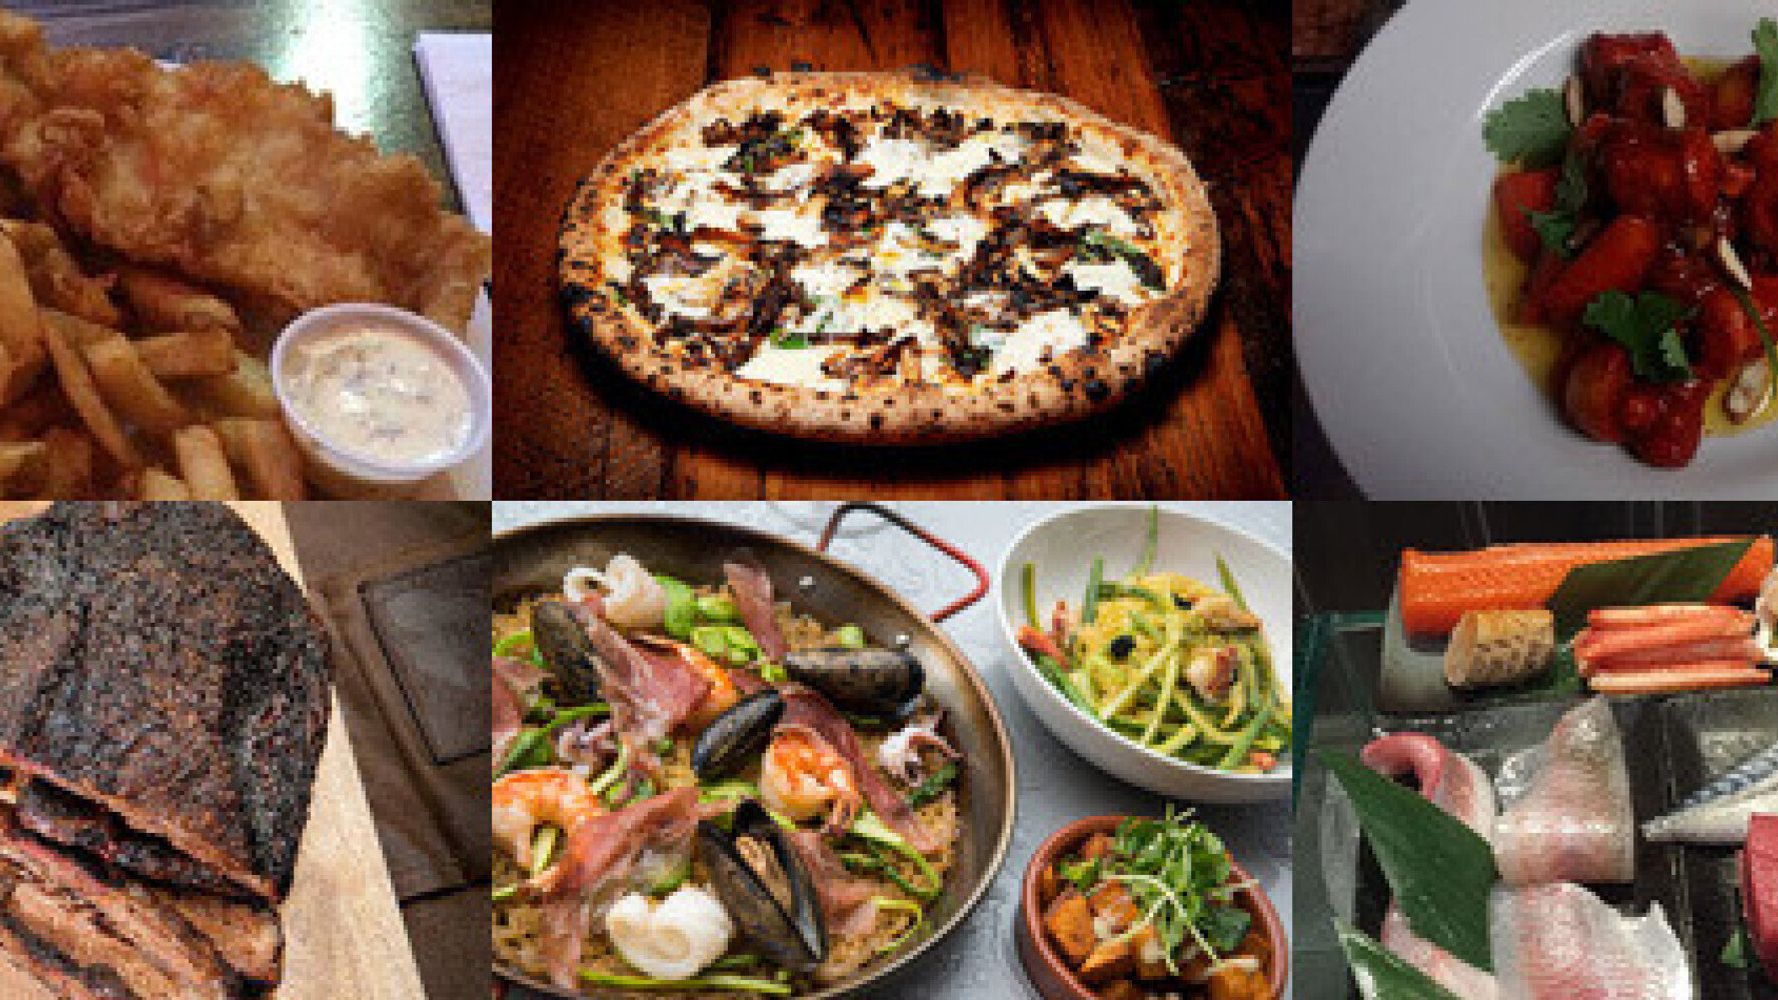 The Best Restaurants In Toronto For 2014 (To Try In 2015) | HuffPost